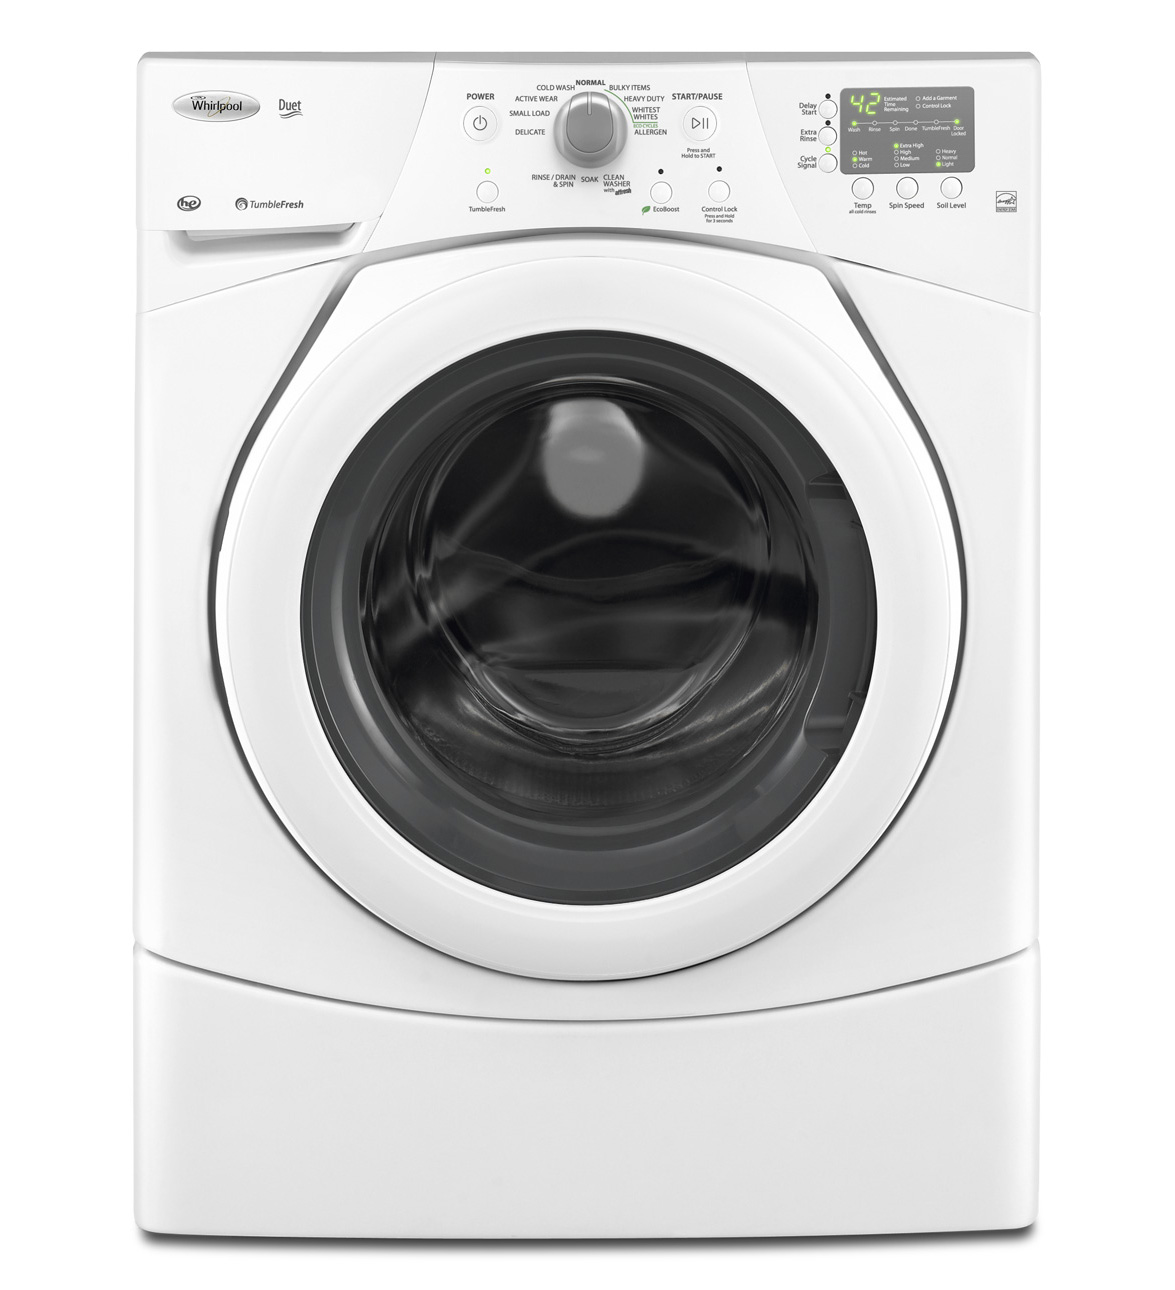 Whirlpool Duet 3.5 cu. ft. High-Efficiency Front Load Washer in White (Model: WFW9151YW)